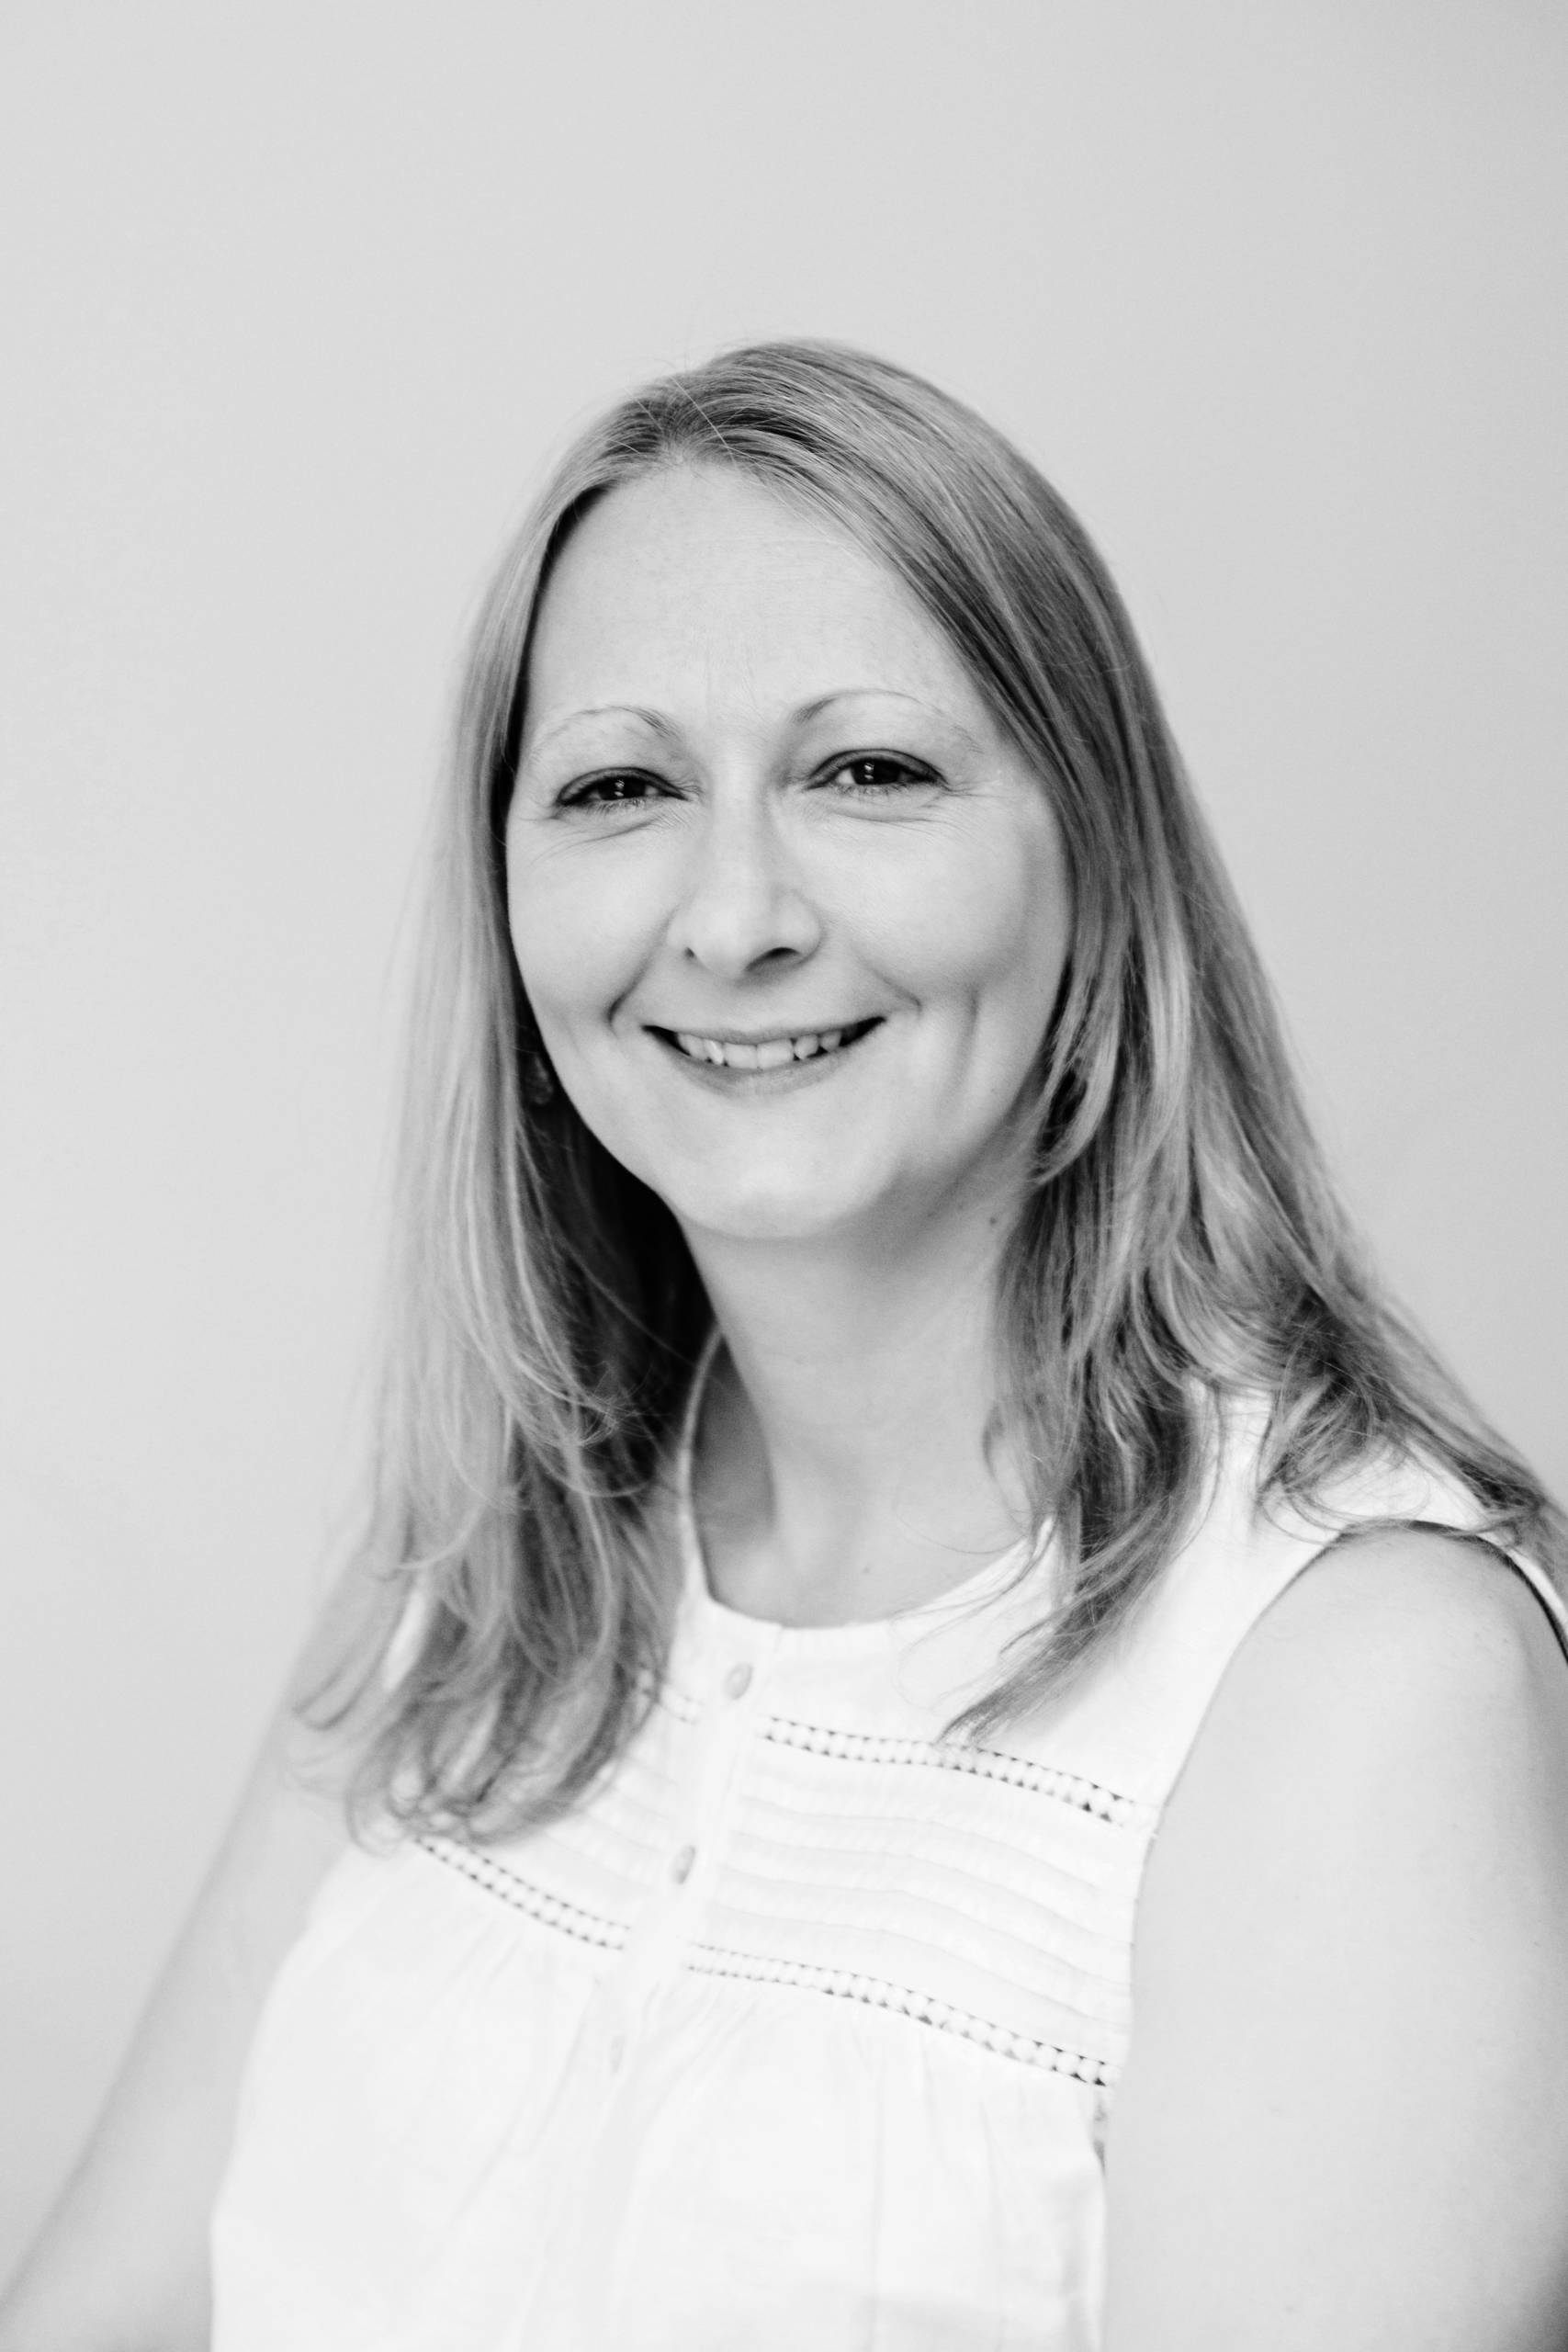 Rebecca Hudson Solicitor Altion Law Solicitors. HMRC & Excise Matters Expert.